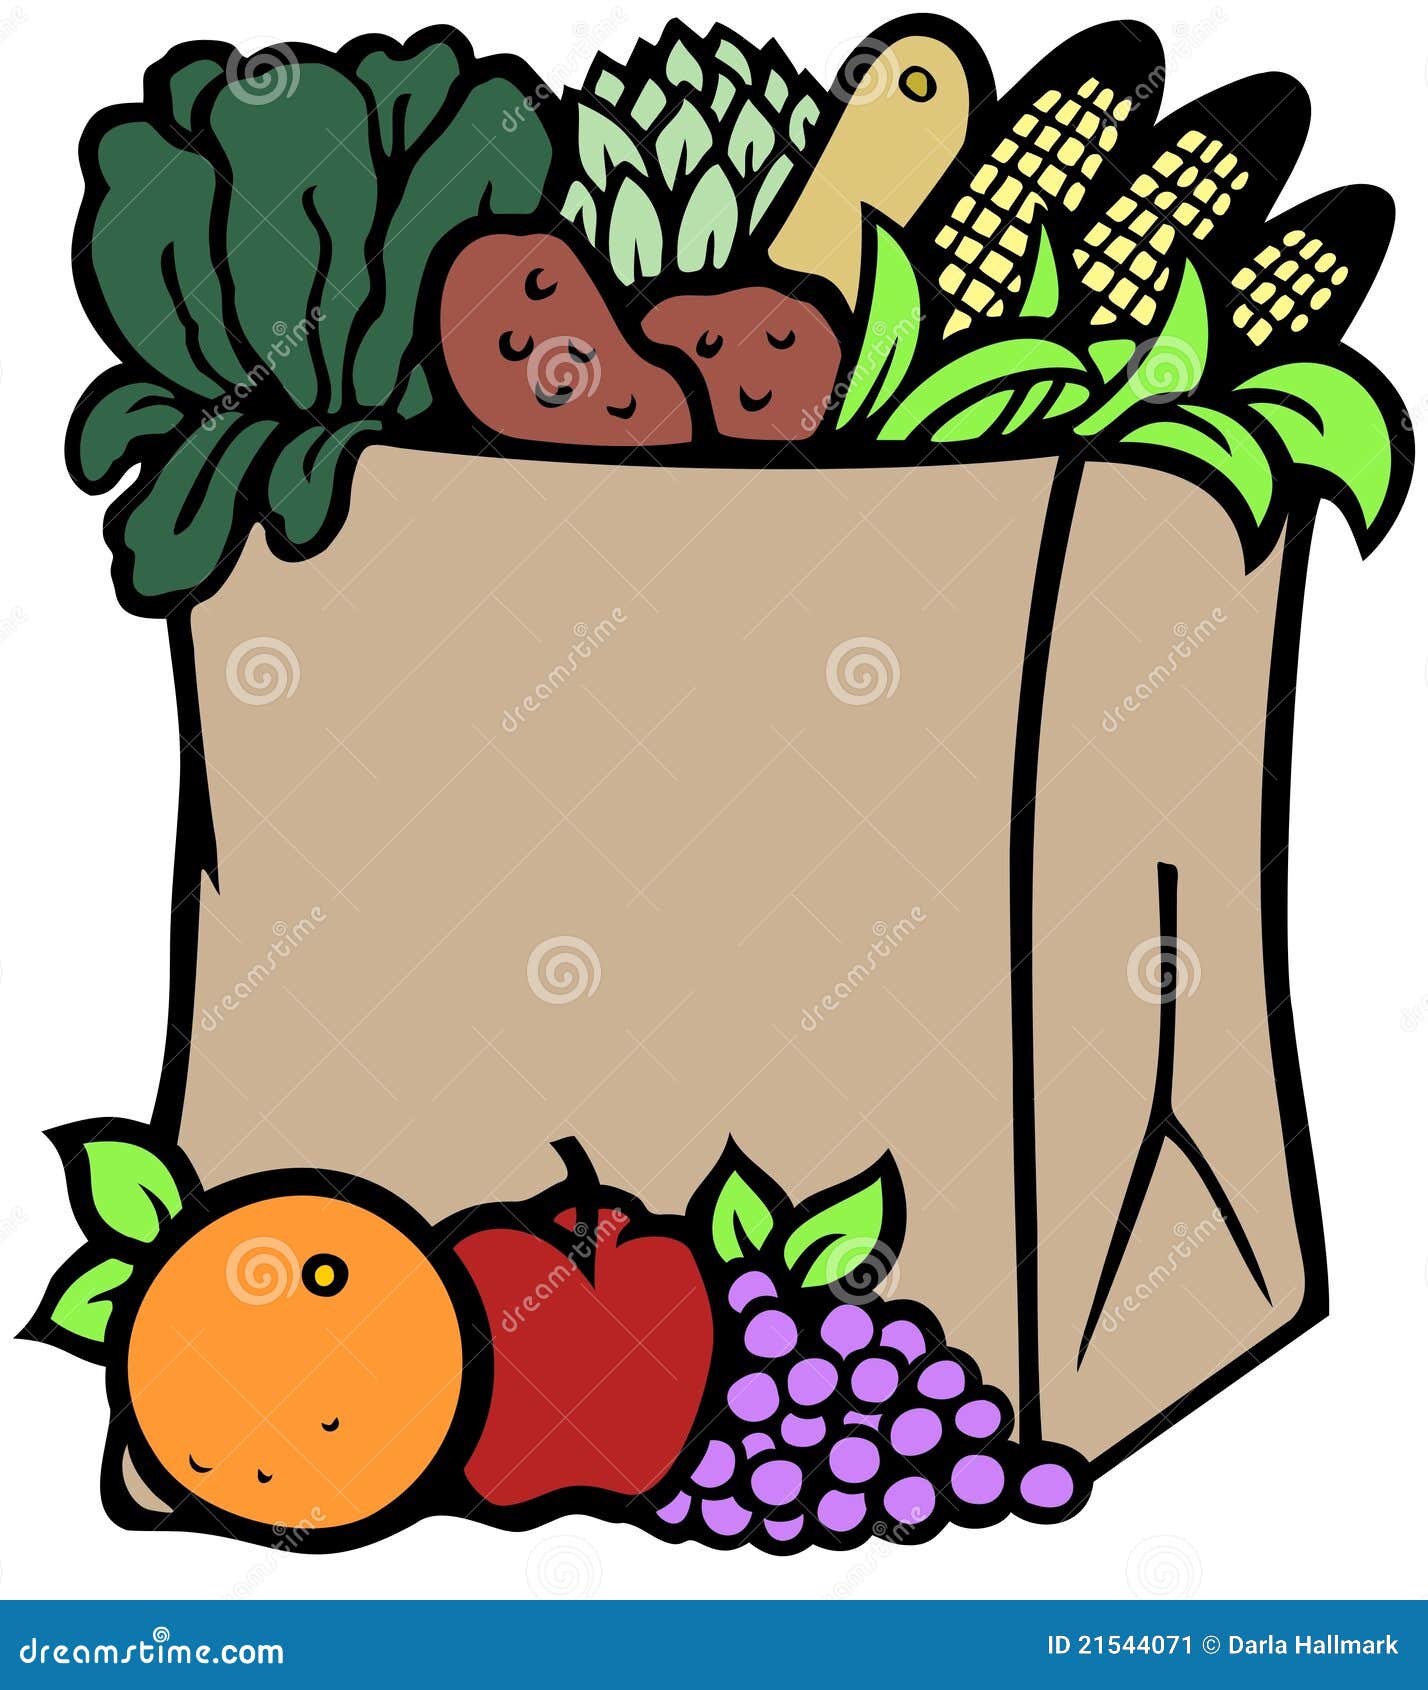 free clip art bag of groceries - photo #23